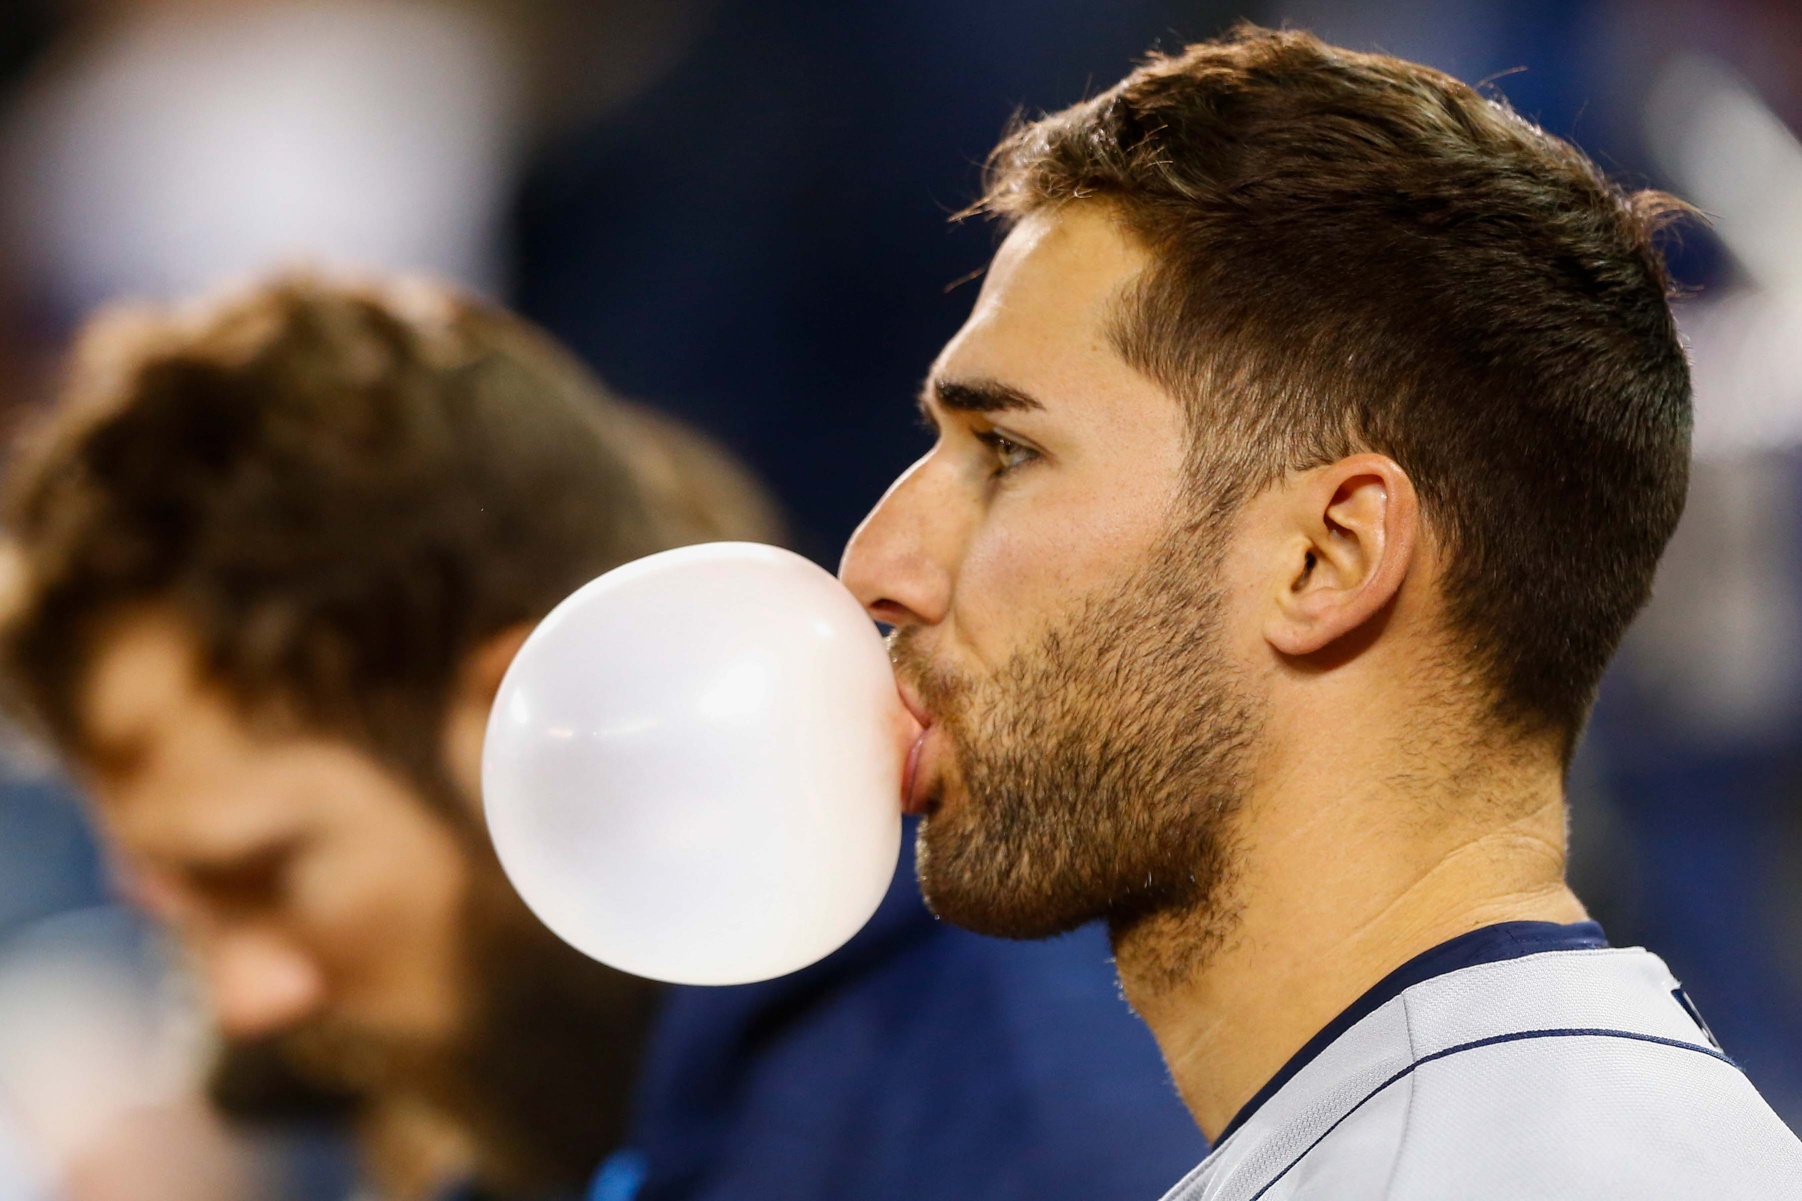 Apr 30, 2017; Toronto, Ontario, CAN; Tampa Bay Rays center fielder Kevin Kiermaier (39) blows a bubble during the national anthem prior to an MLB game against the Toronto Blue Jays at Rogers Centre. Mandatory Credit: Kevin Sousa-USA TODAY Sports